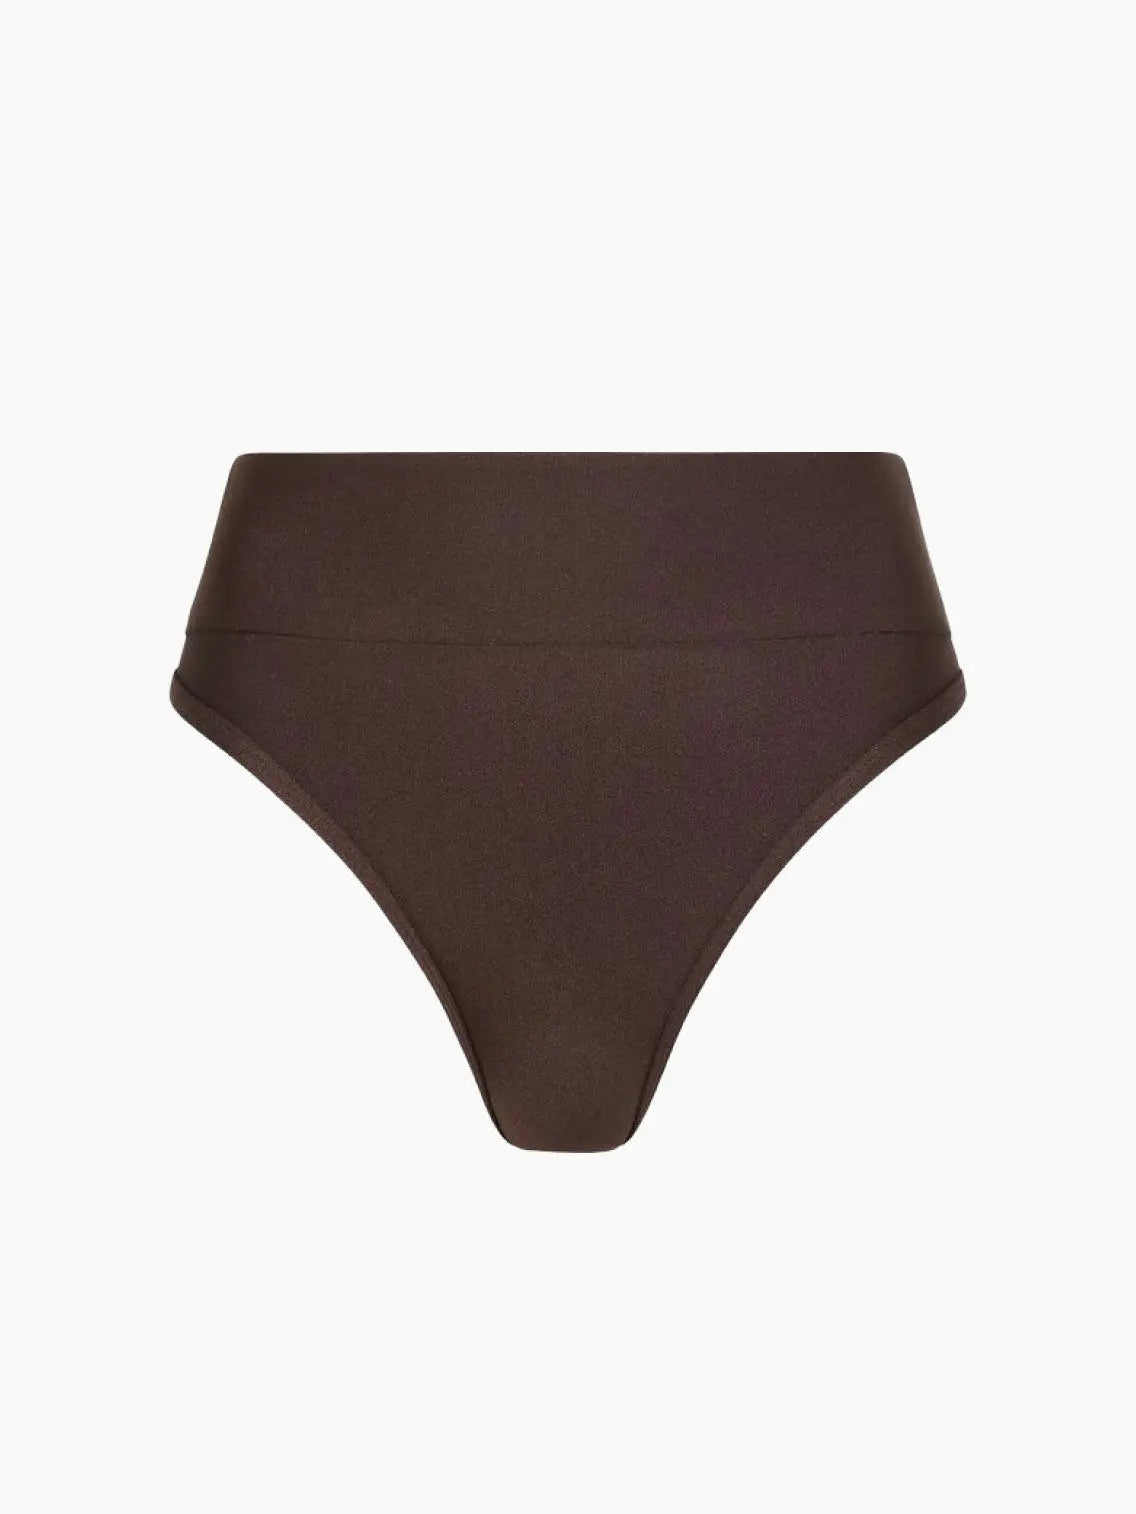 A pair of Chocolate High Waist Brief underwear from Innes Lauren. The fabric appears smooth, and the waistband is wide for added support and comfort. The style is simple and modern, offering full coverage.